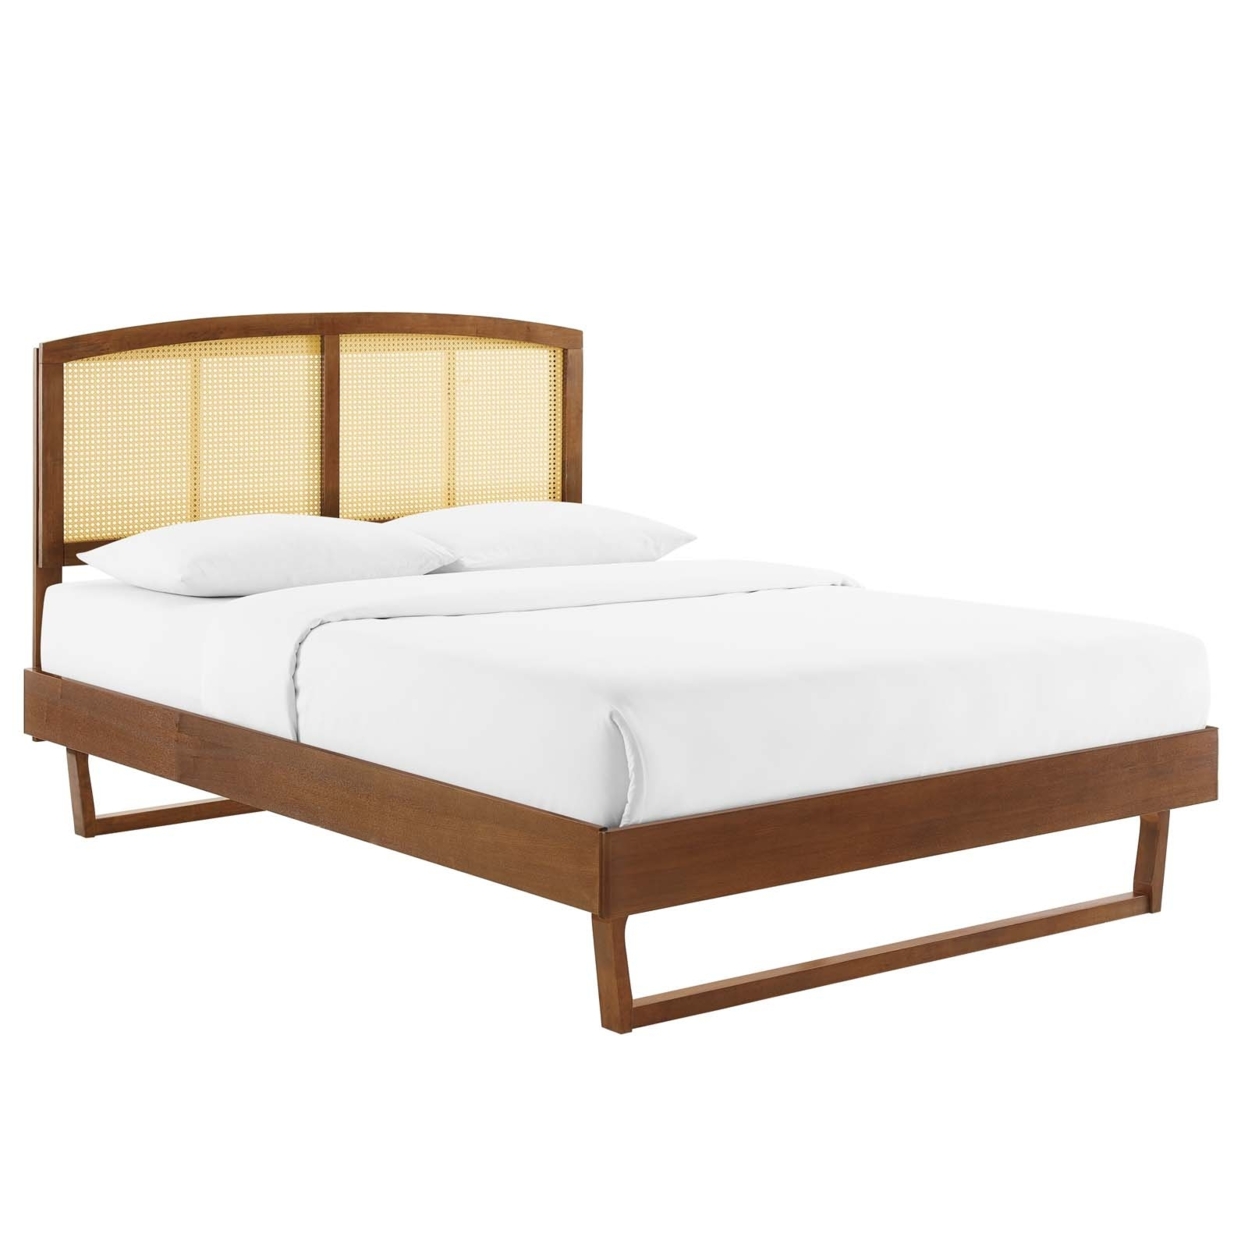 Sierra Cane And Wood King Platform Bed With Angular Legs, Walnut